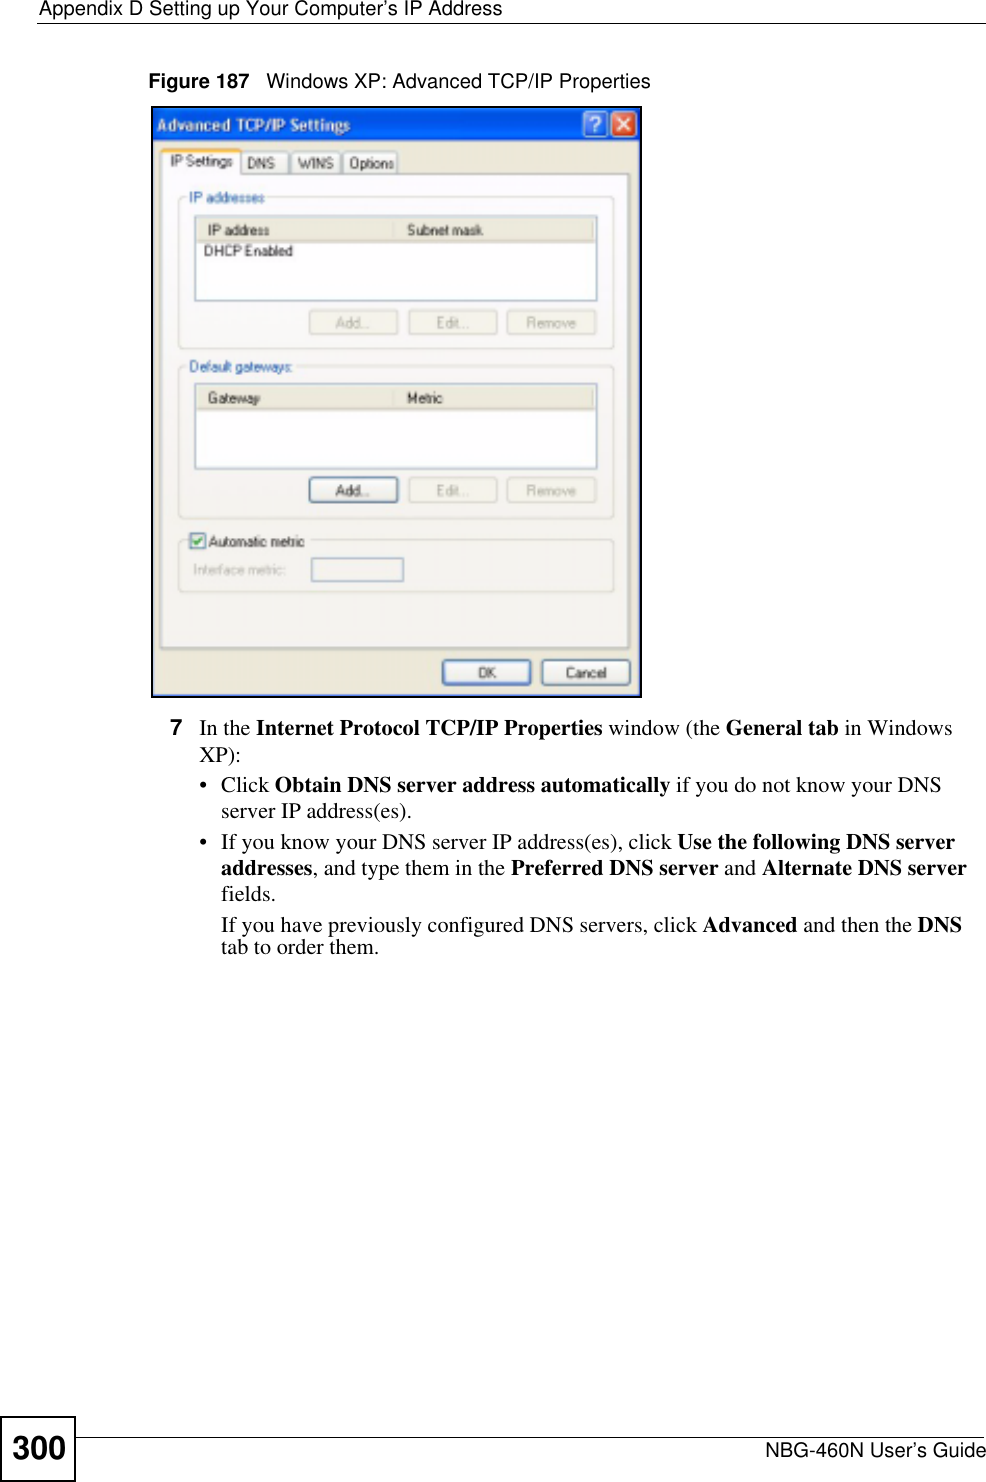 Appendix D Setting up Your Computer’s IP AddressNBG-460N User’s Guide300Figure 187   Windows XP: Advanced TCP/IP Properties7In the Internet Protocol TCP/IP Properties window (the General tab in Windows XP):• Click Obtain DNS server address automatically if you do not know your DNS server IP address(es).• If you know your DNS server IP address(es), click Use the following DNS server addresses, and type them in the Preferred DNS server and Alternate DNS serverfields.If you have previously configured DNS servers, click Advanced and then the DNStab to order them.